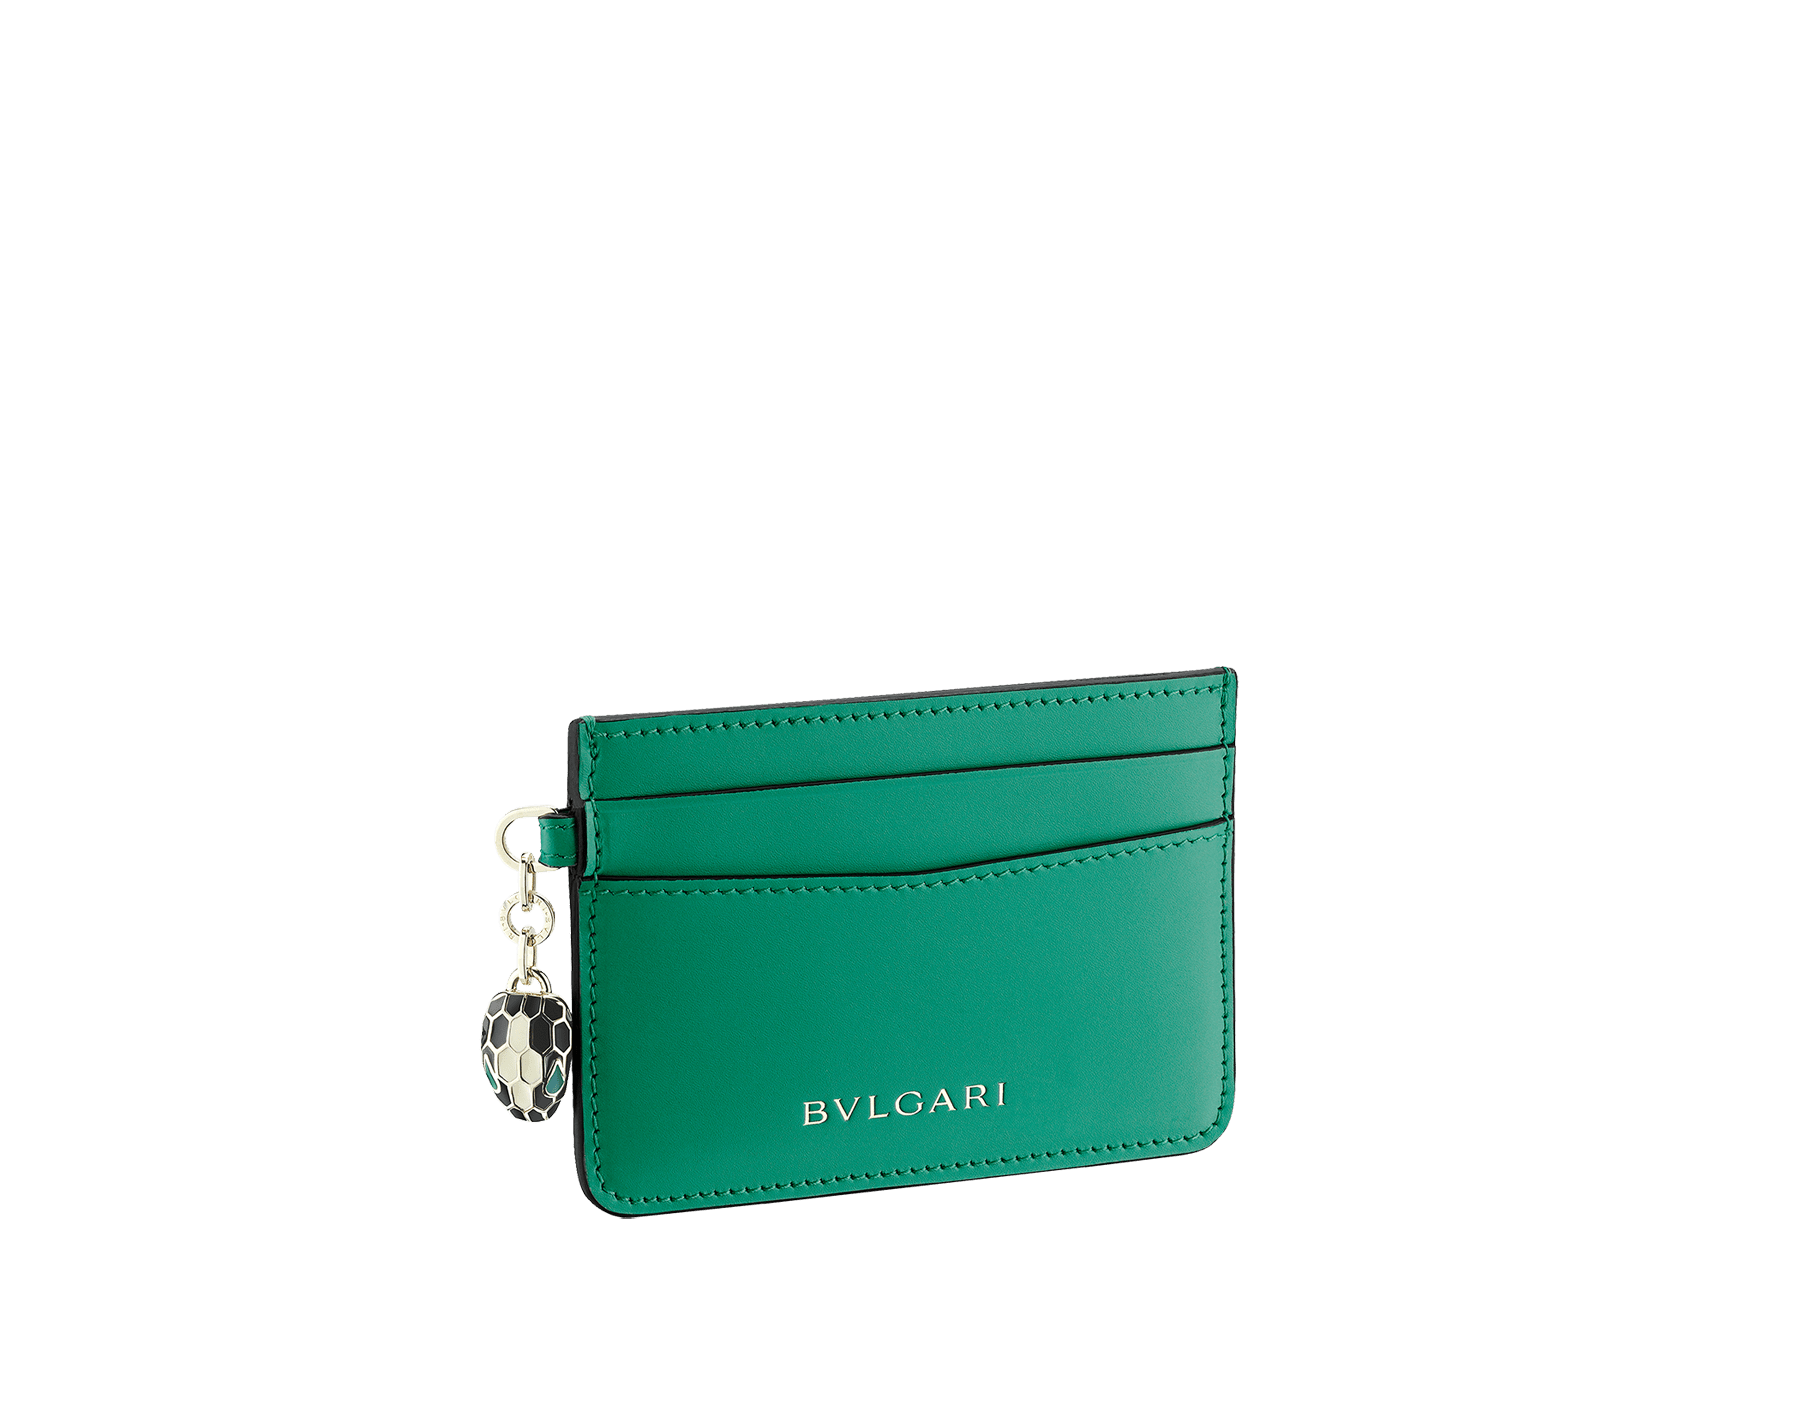 Serpenti Forever card holder in emerald green calf leather. Captivating snakehead charm in light gold-plated brass embellished with black and white agate enamel scales and emerald green enamel eyes. 291852 image 1